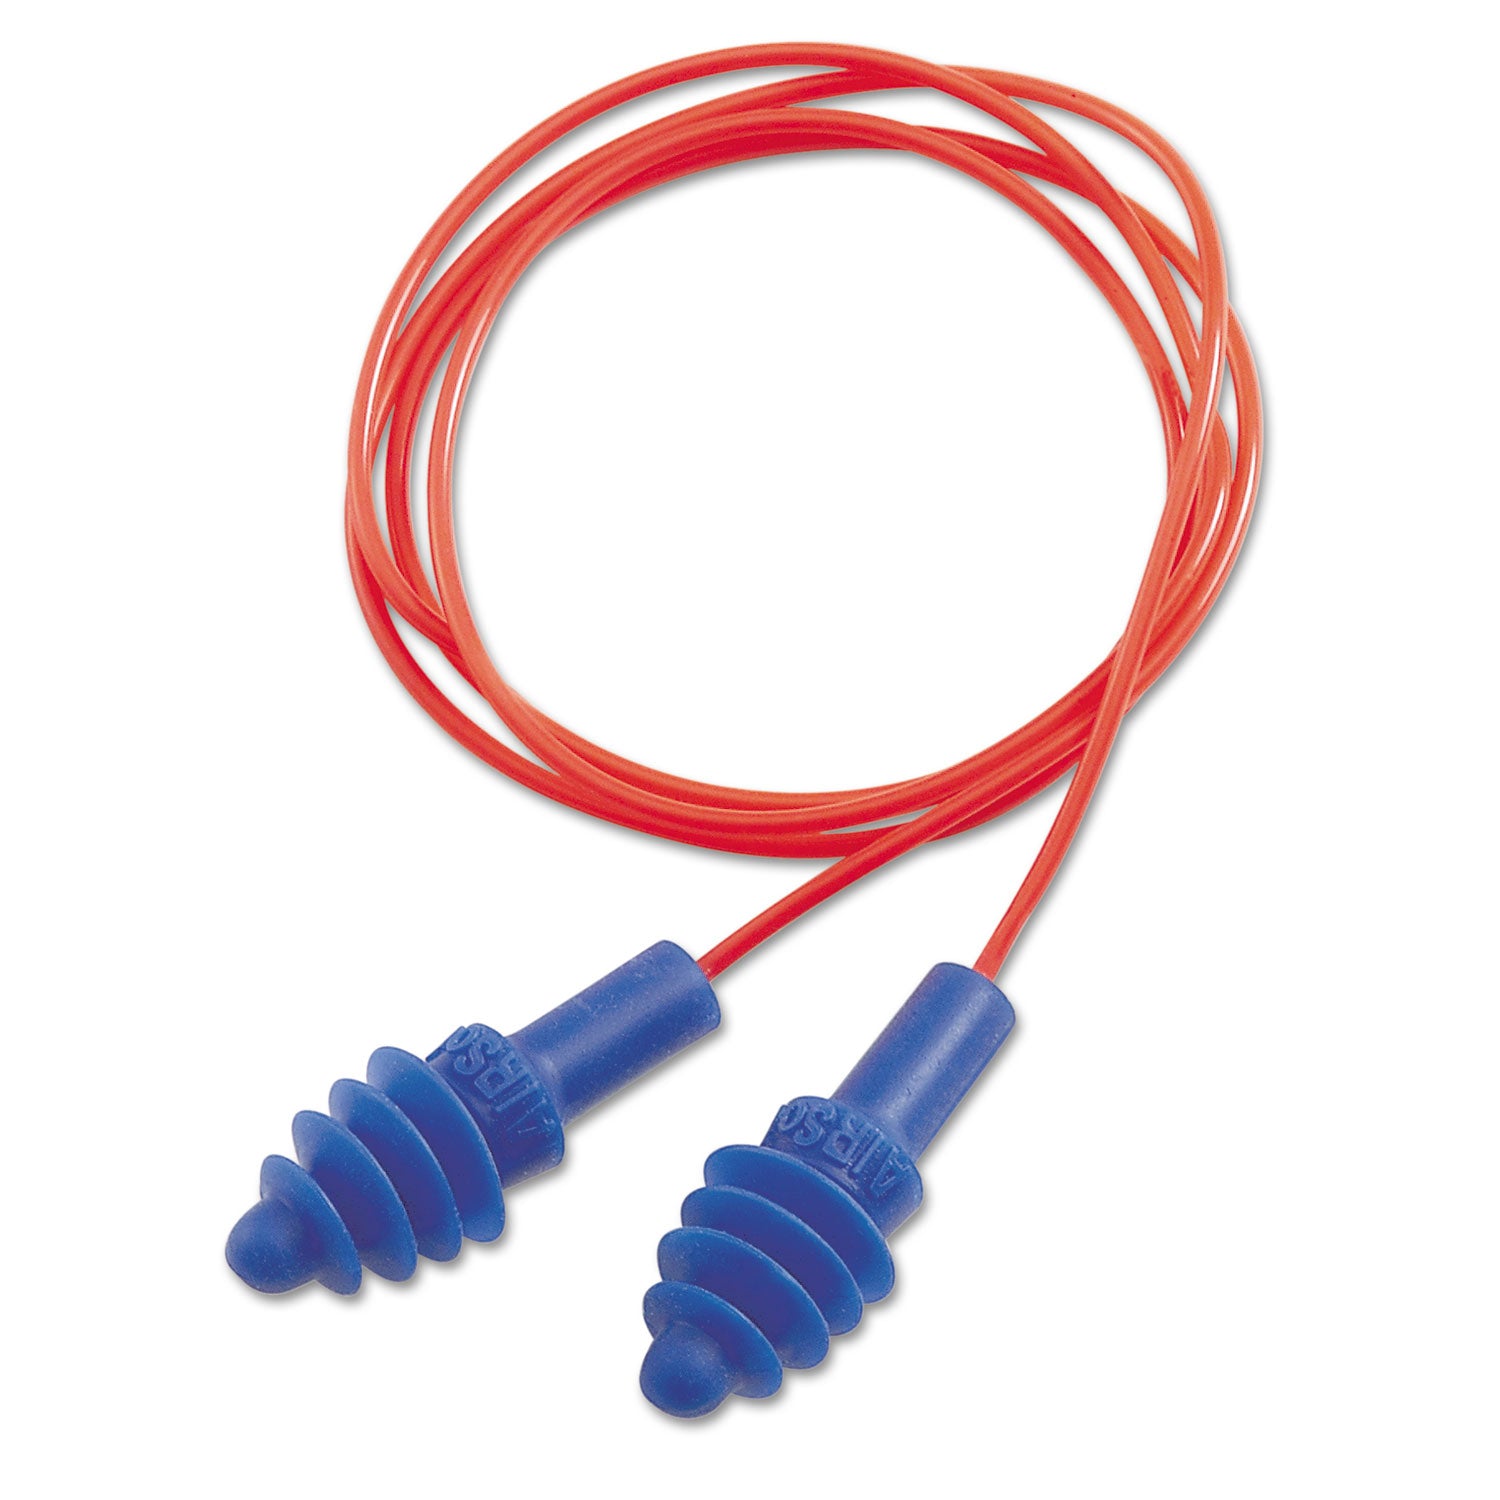 DPAS-30R AirSoft Multiple-Use Earplugs, 27NRR, Red Polycord, Blue, 100/Box - 